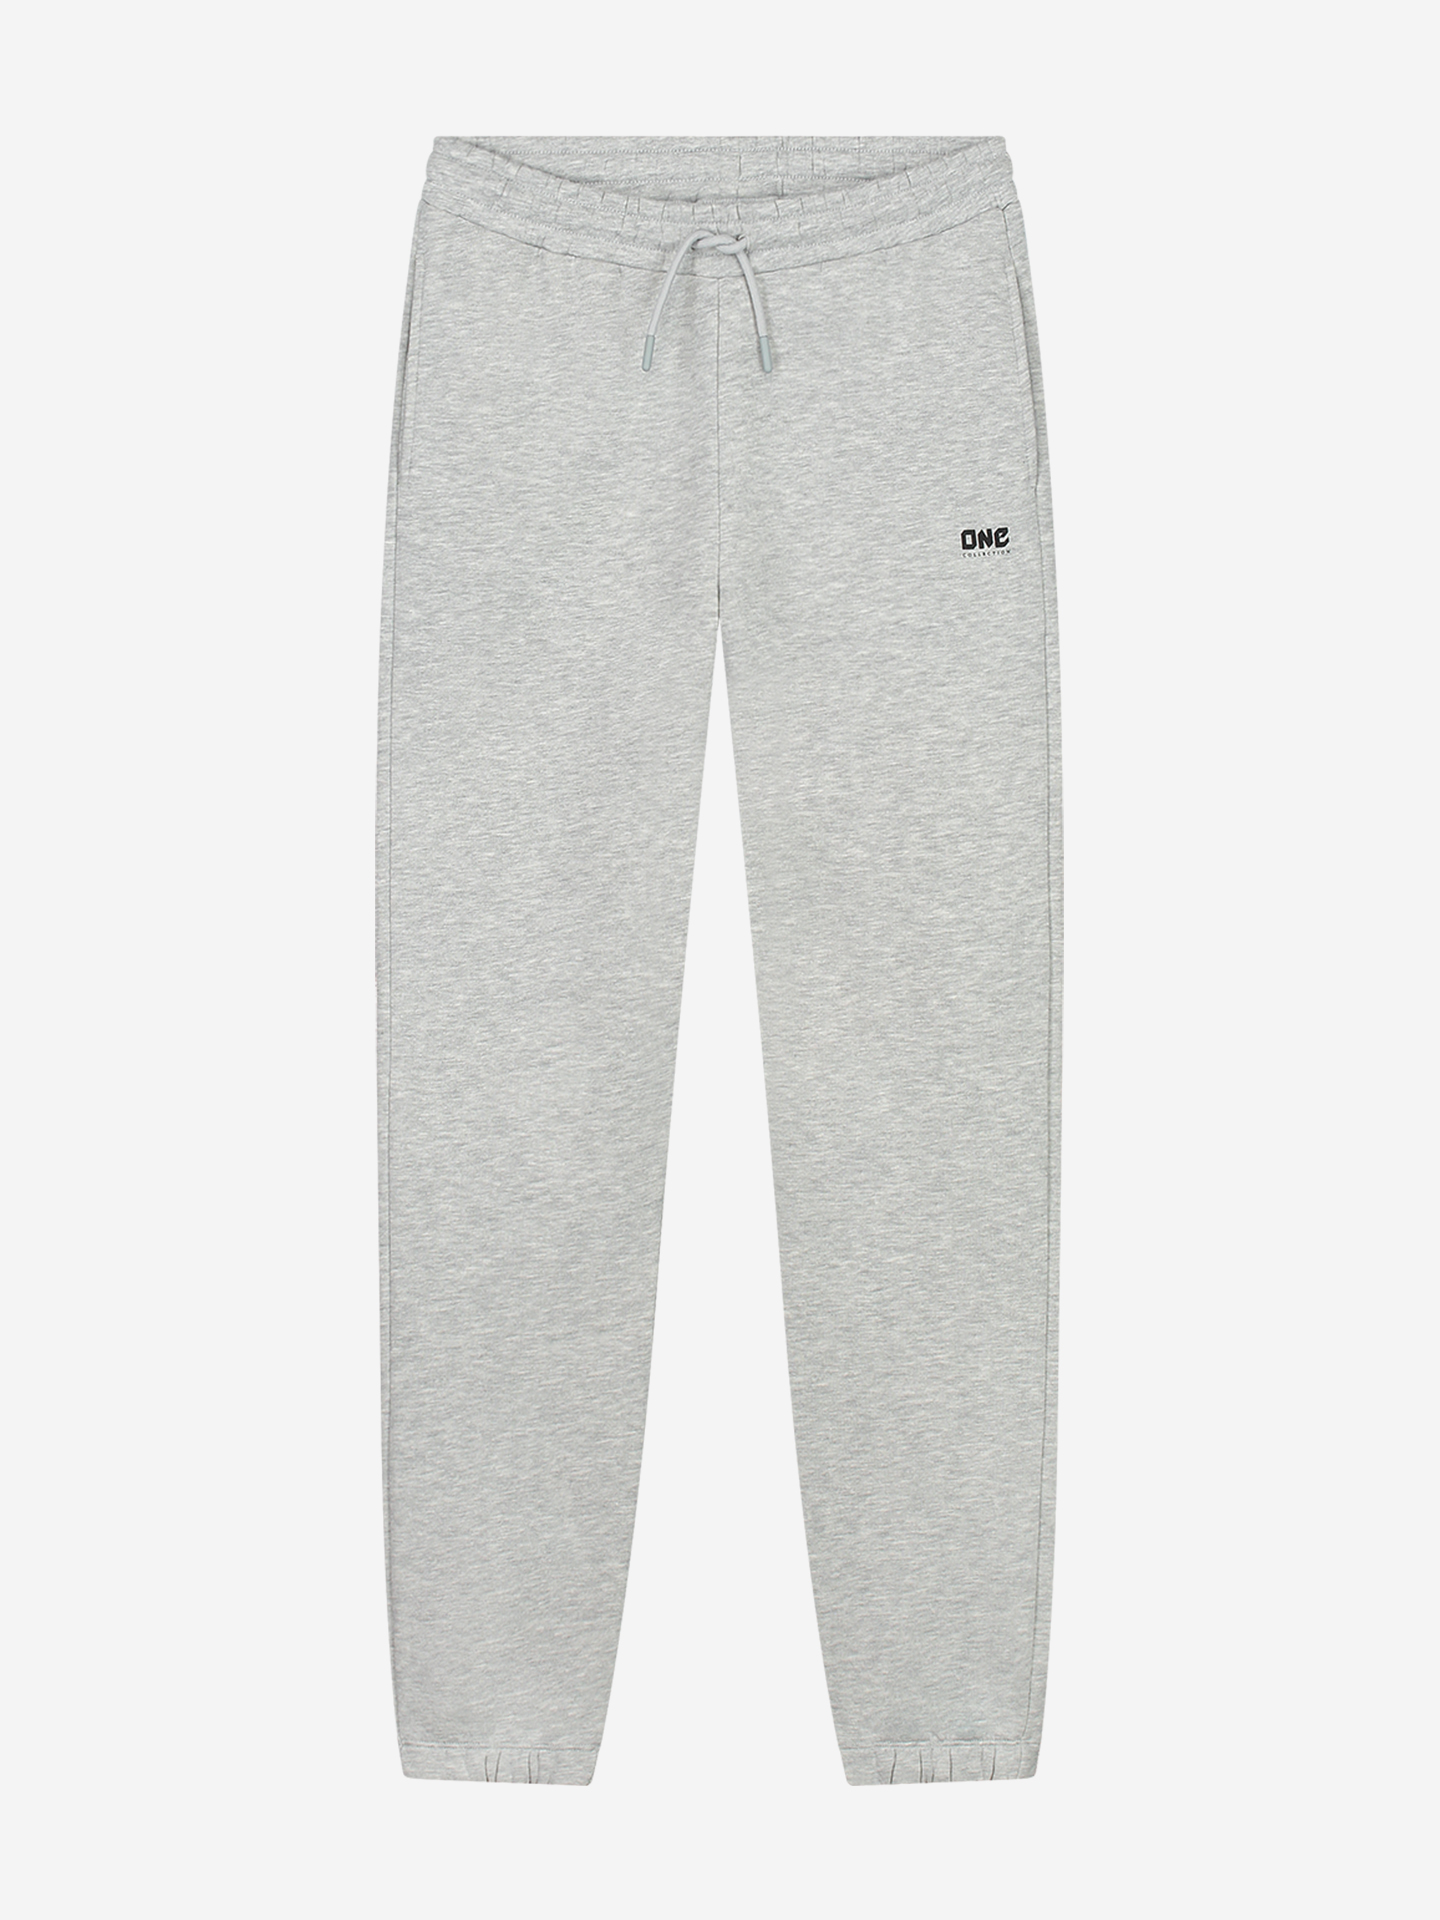 Sweatpants with small London print